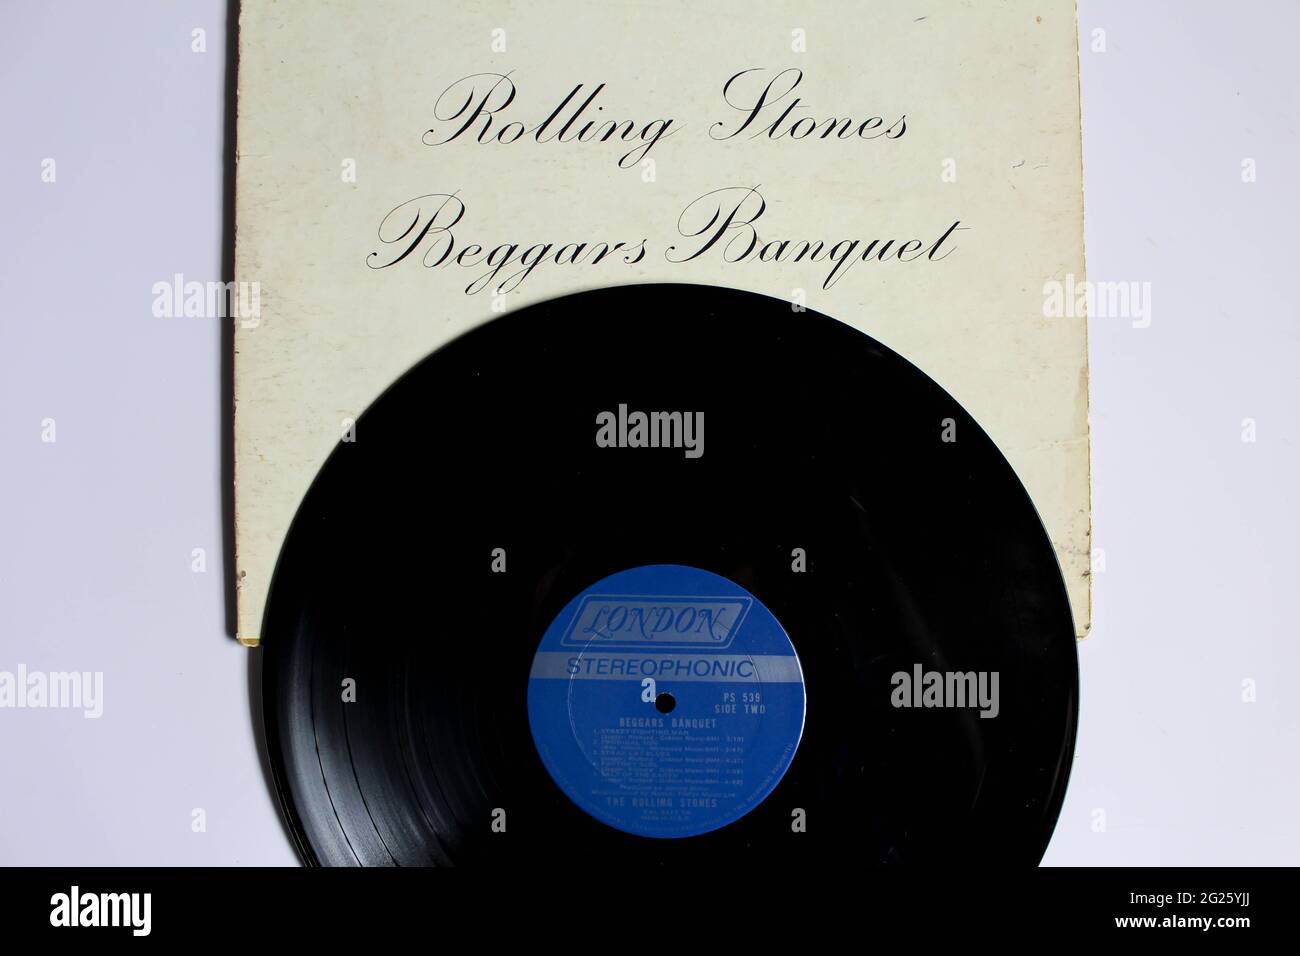 rock The Rolling Stones music album on vinyl record LP Titled: Beggars Banquet album cover Stock Photo - Alamy